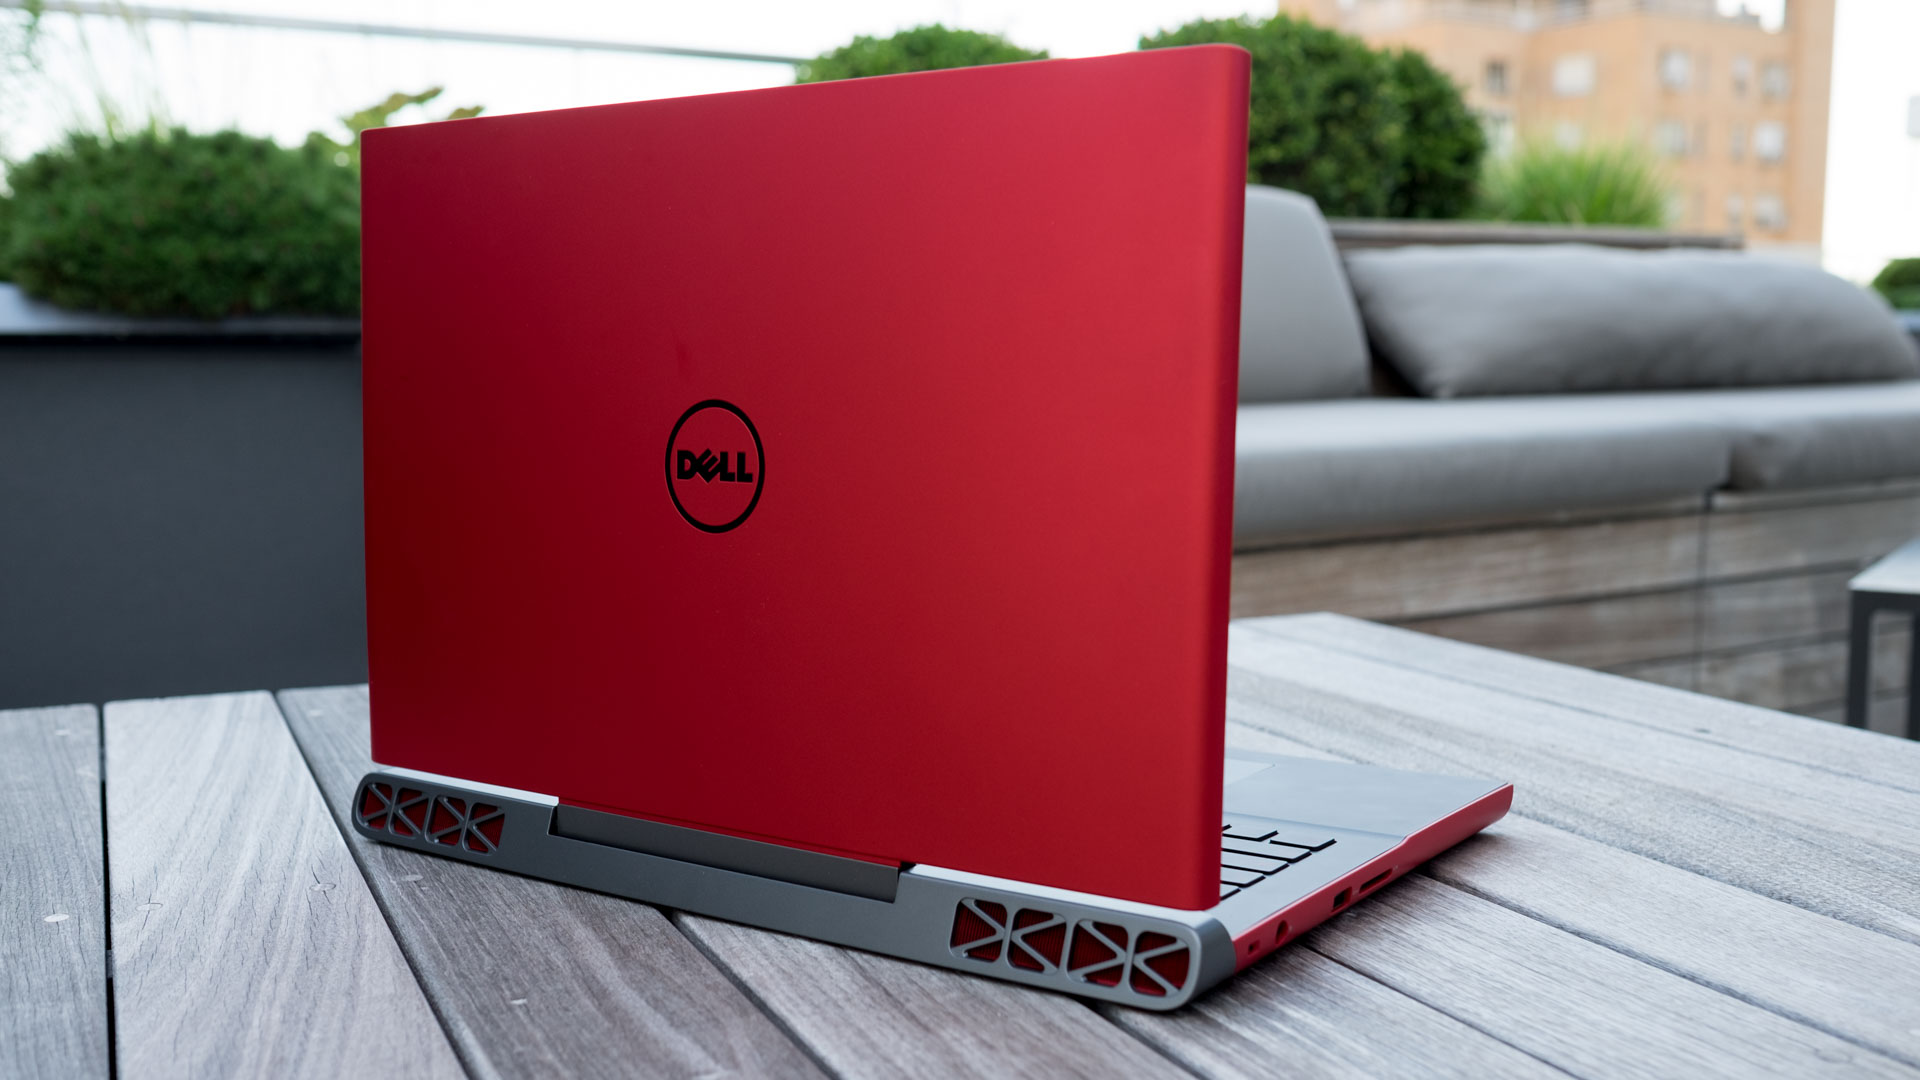 Dell 15 7000 game. Ноутбук dell Inspiron 15. Ноутбук Делл Inspiron 15. Dell Inspiron 15 7000. Dell Inspiron 15 Gaming Laptop.